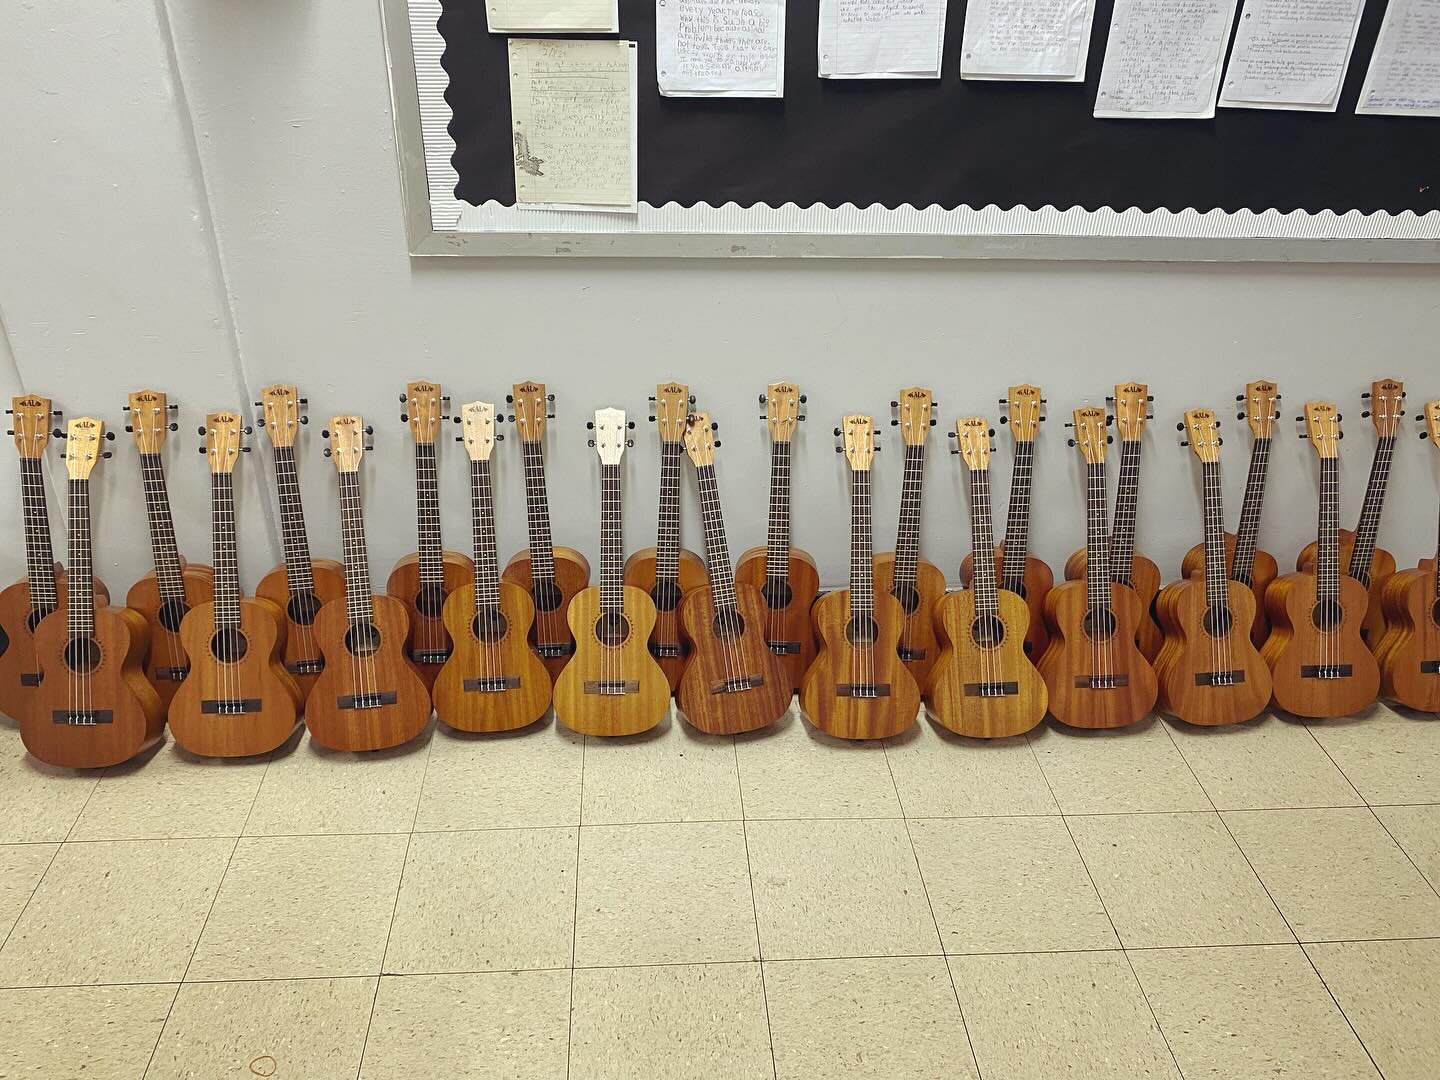 Unboxed and tuned up LOTS of ukuleles for @ps18bk - so excited to start a new program there next week and get everybody strumming!